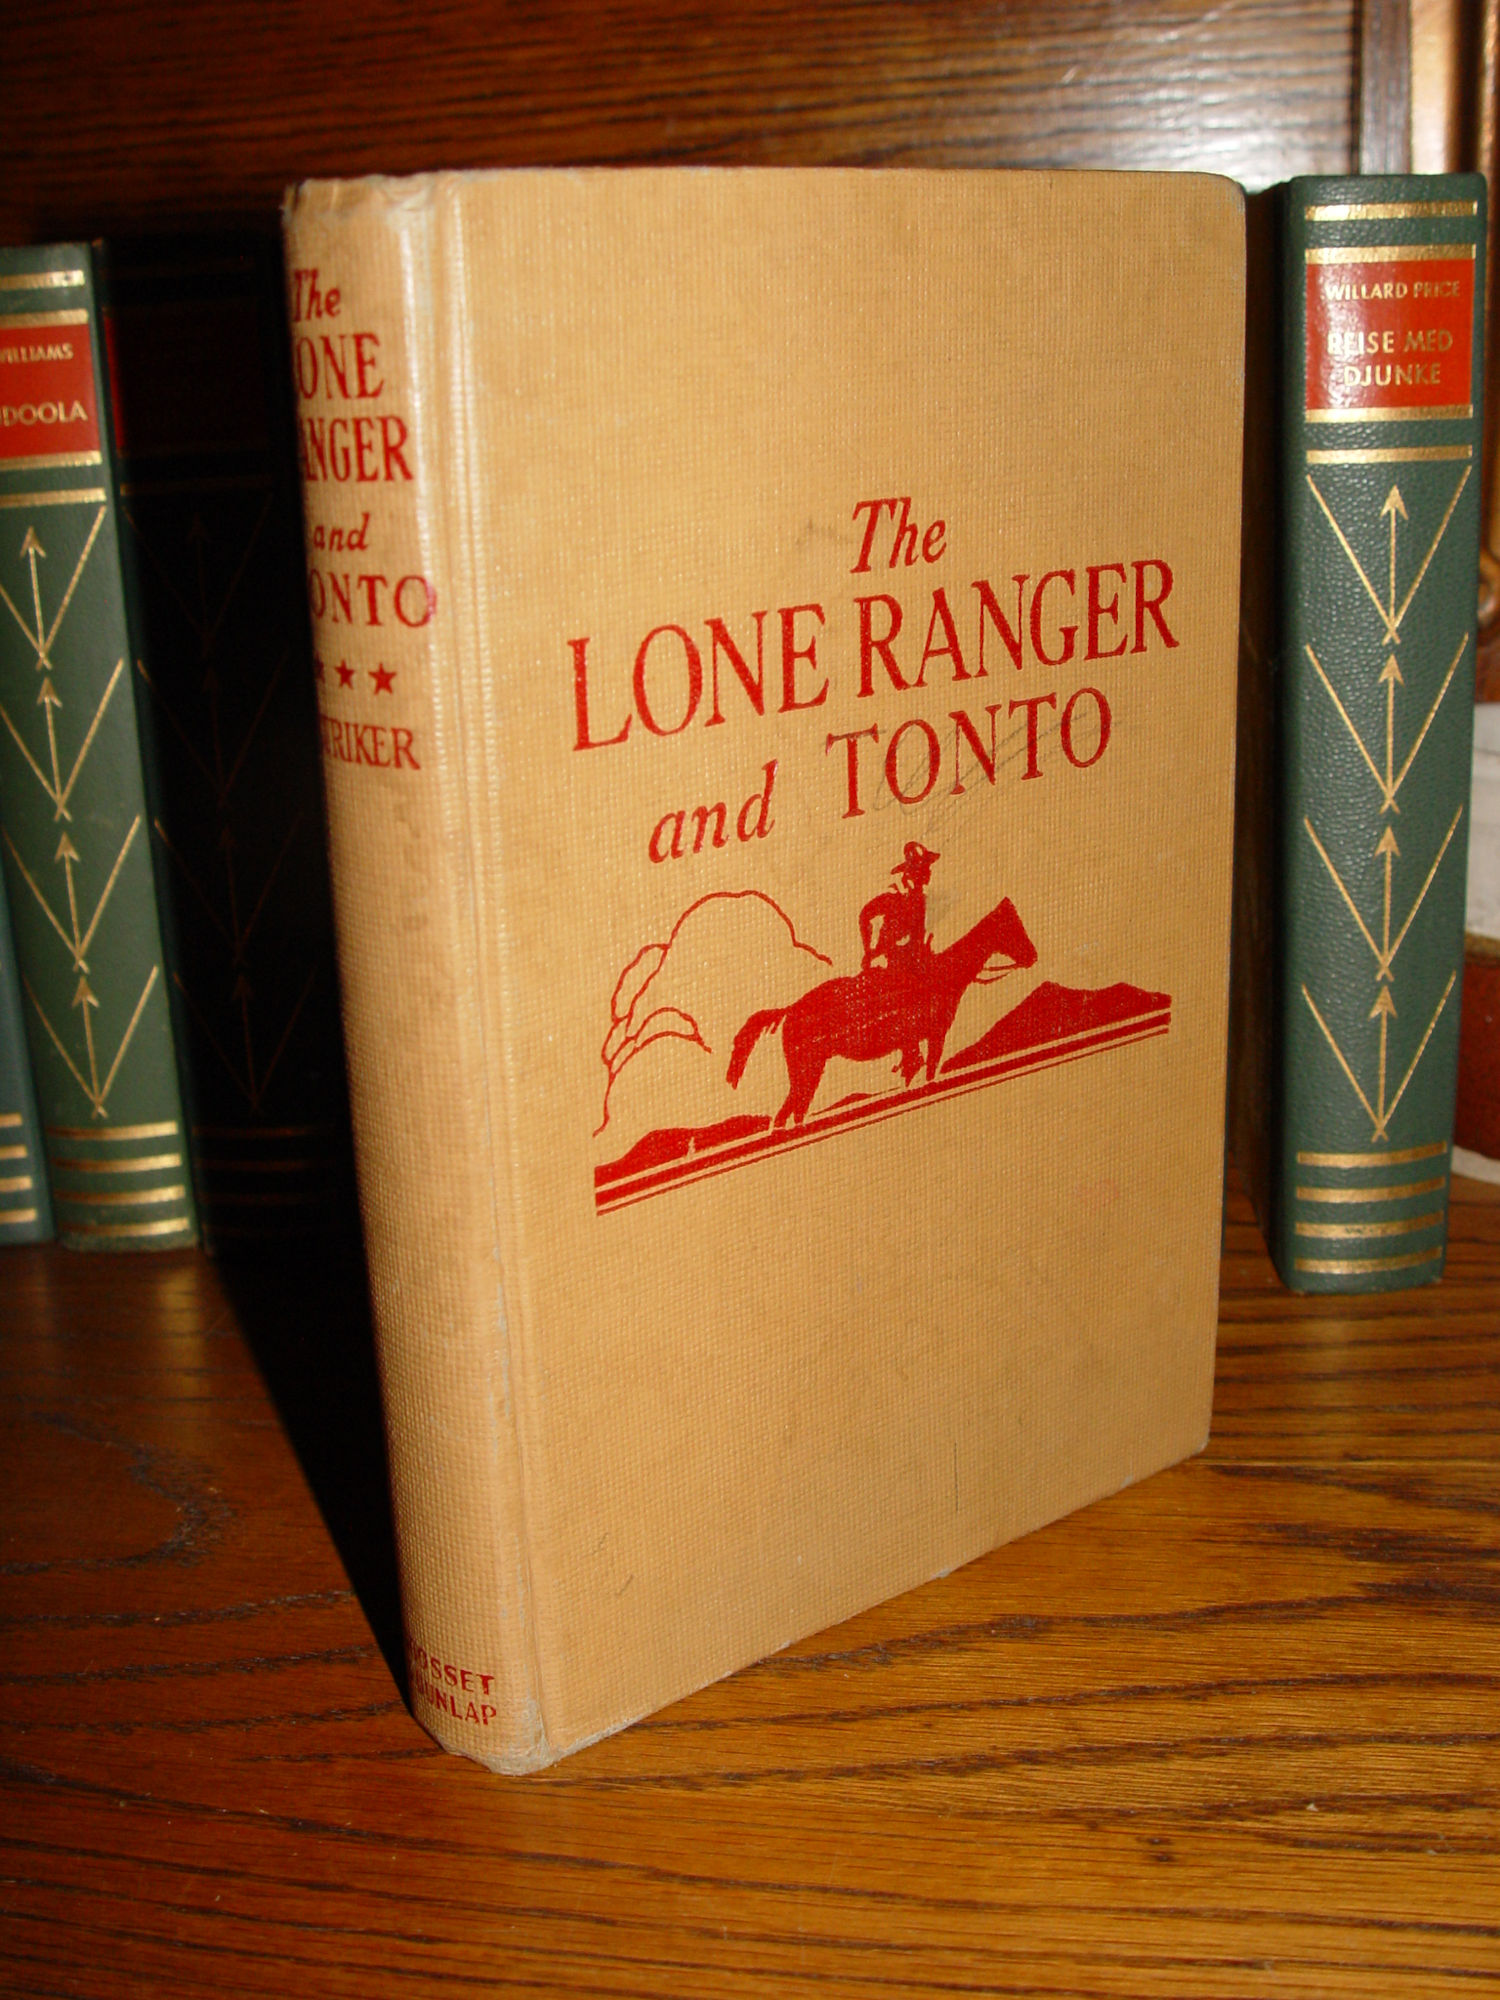 1940 The Lone Ranger and Tonto by Fran
                        Striker